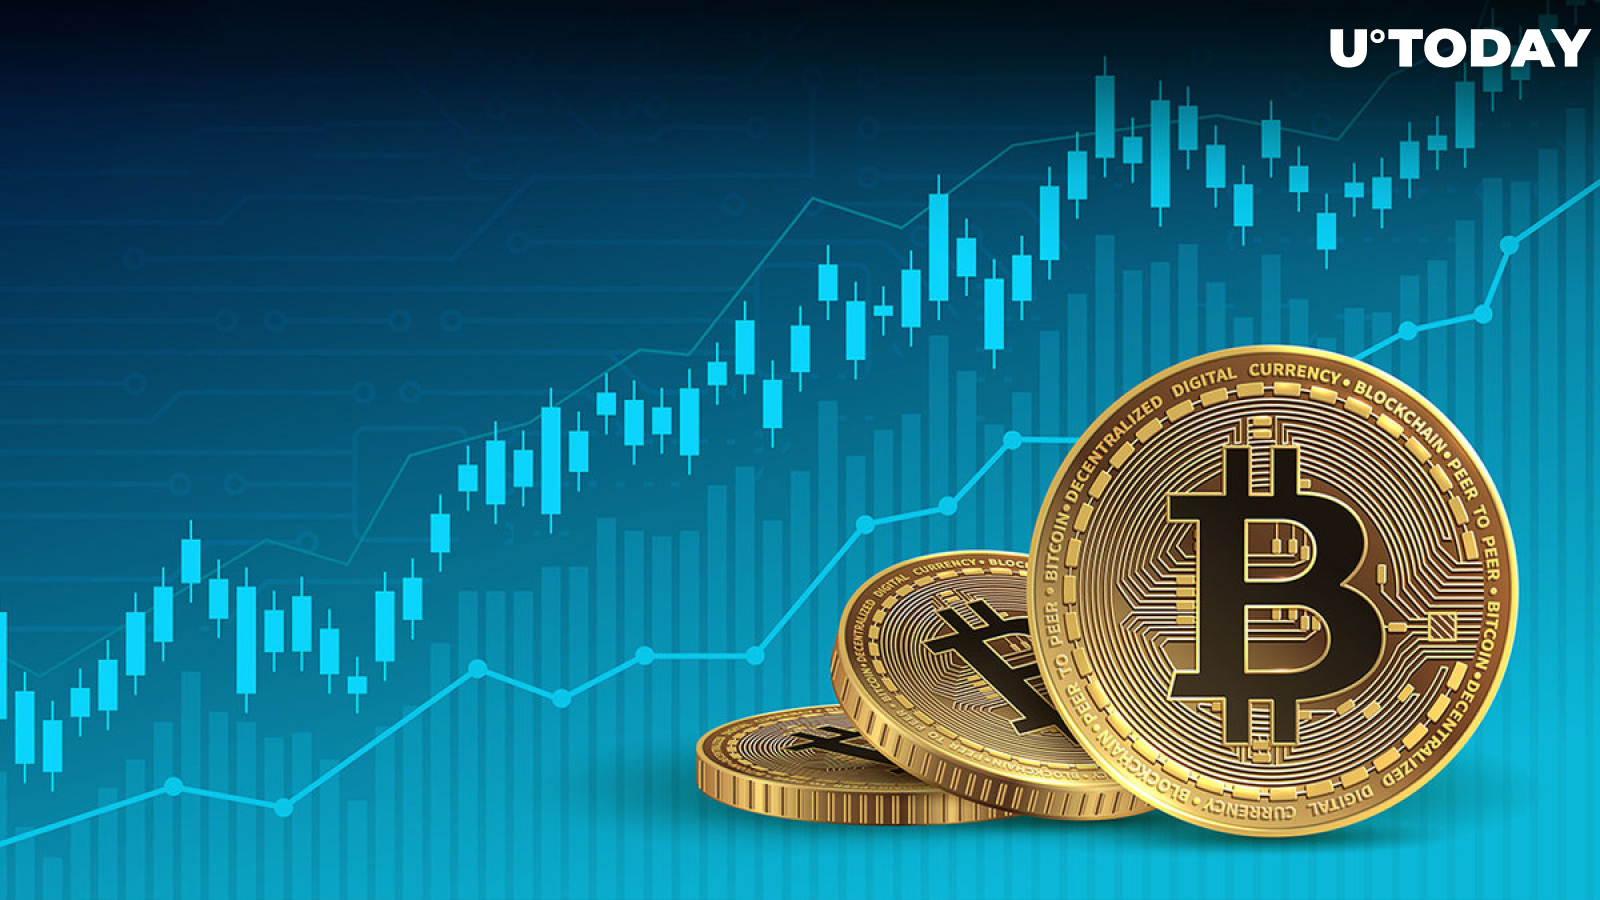 Bitcoin (BTC) up 7%, But Data Shows We Are Not out of Woods Yet